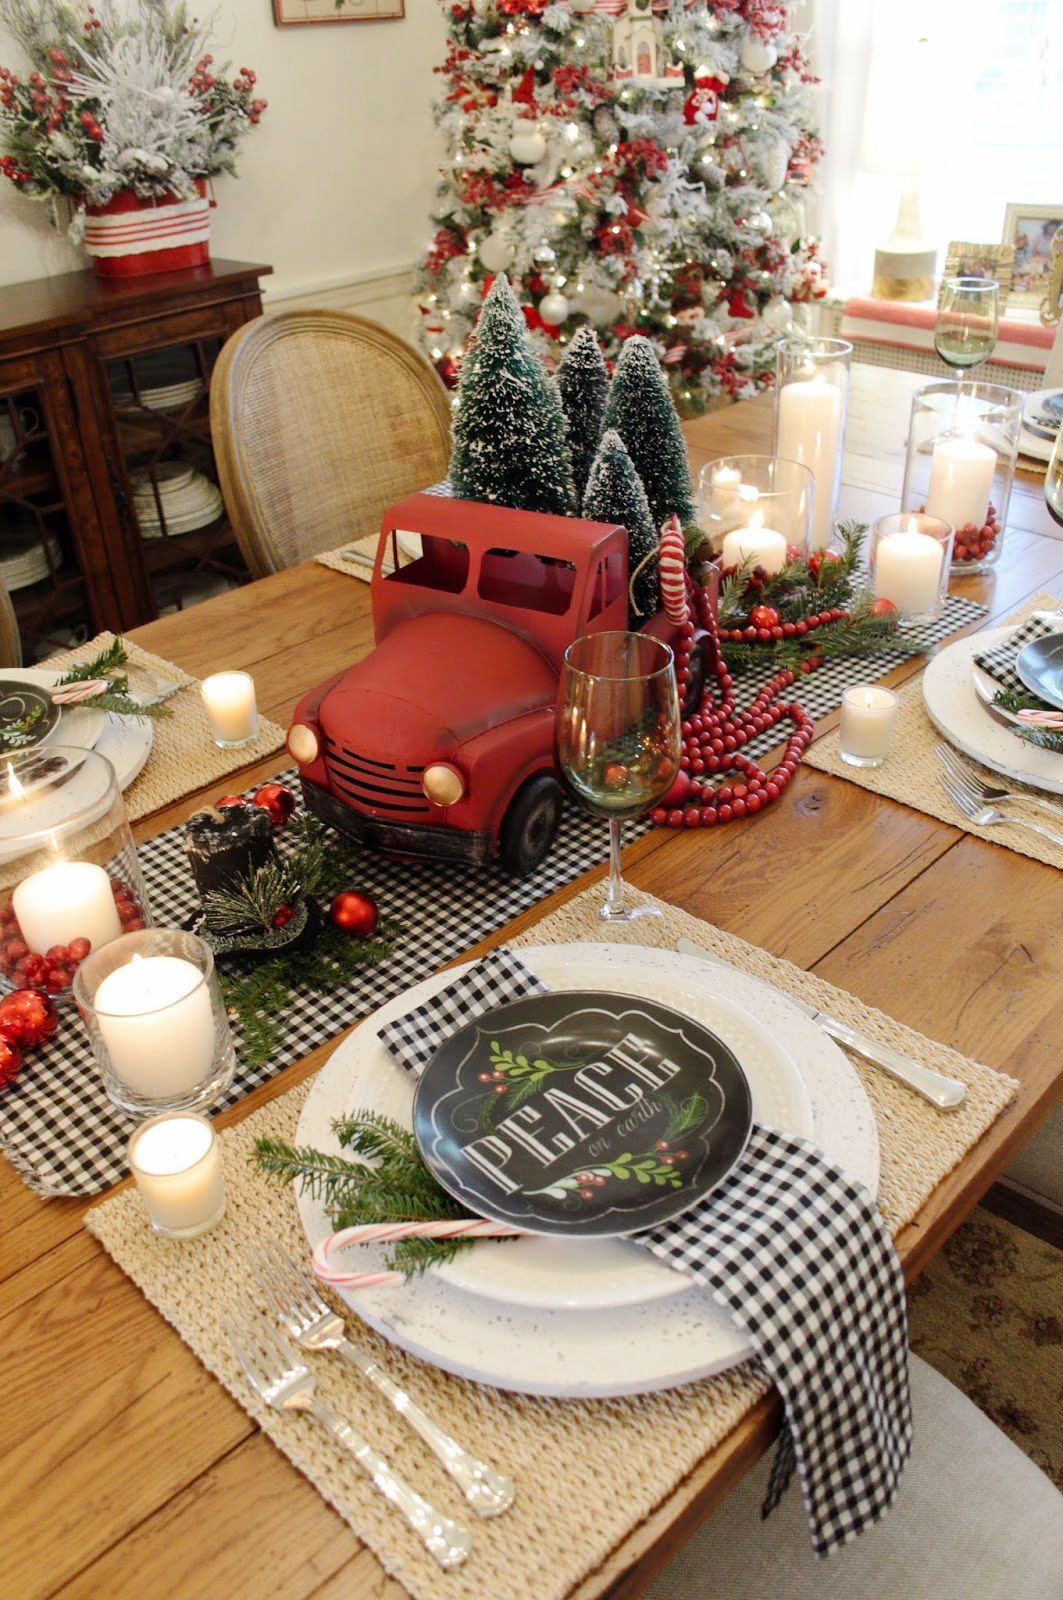 The Best Christmas Table Decorations To Keep Your Spirits Bright